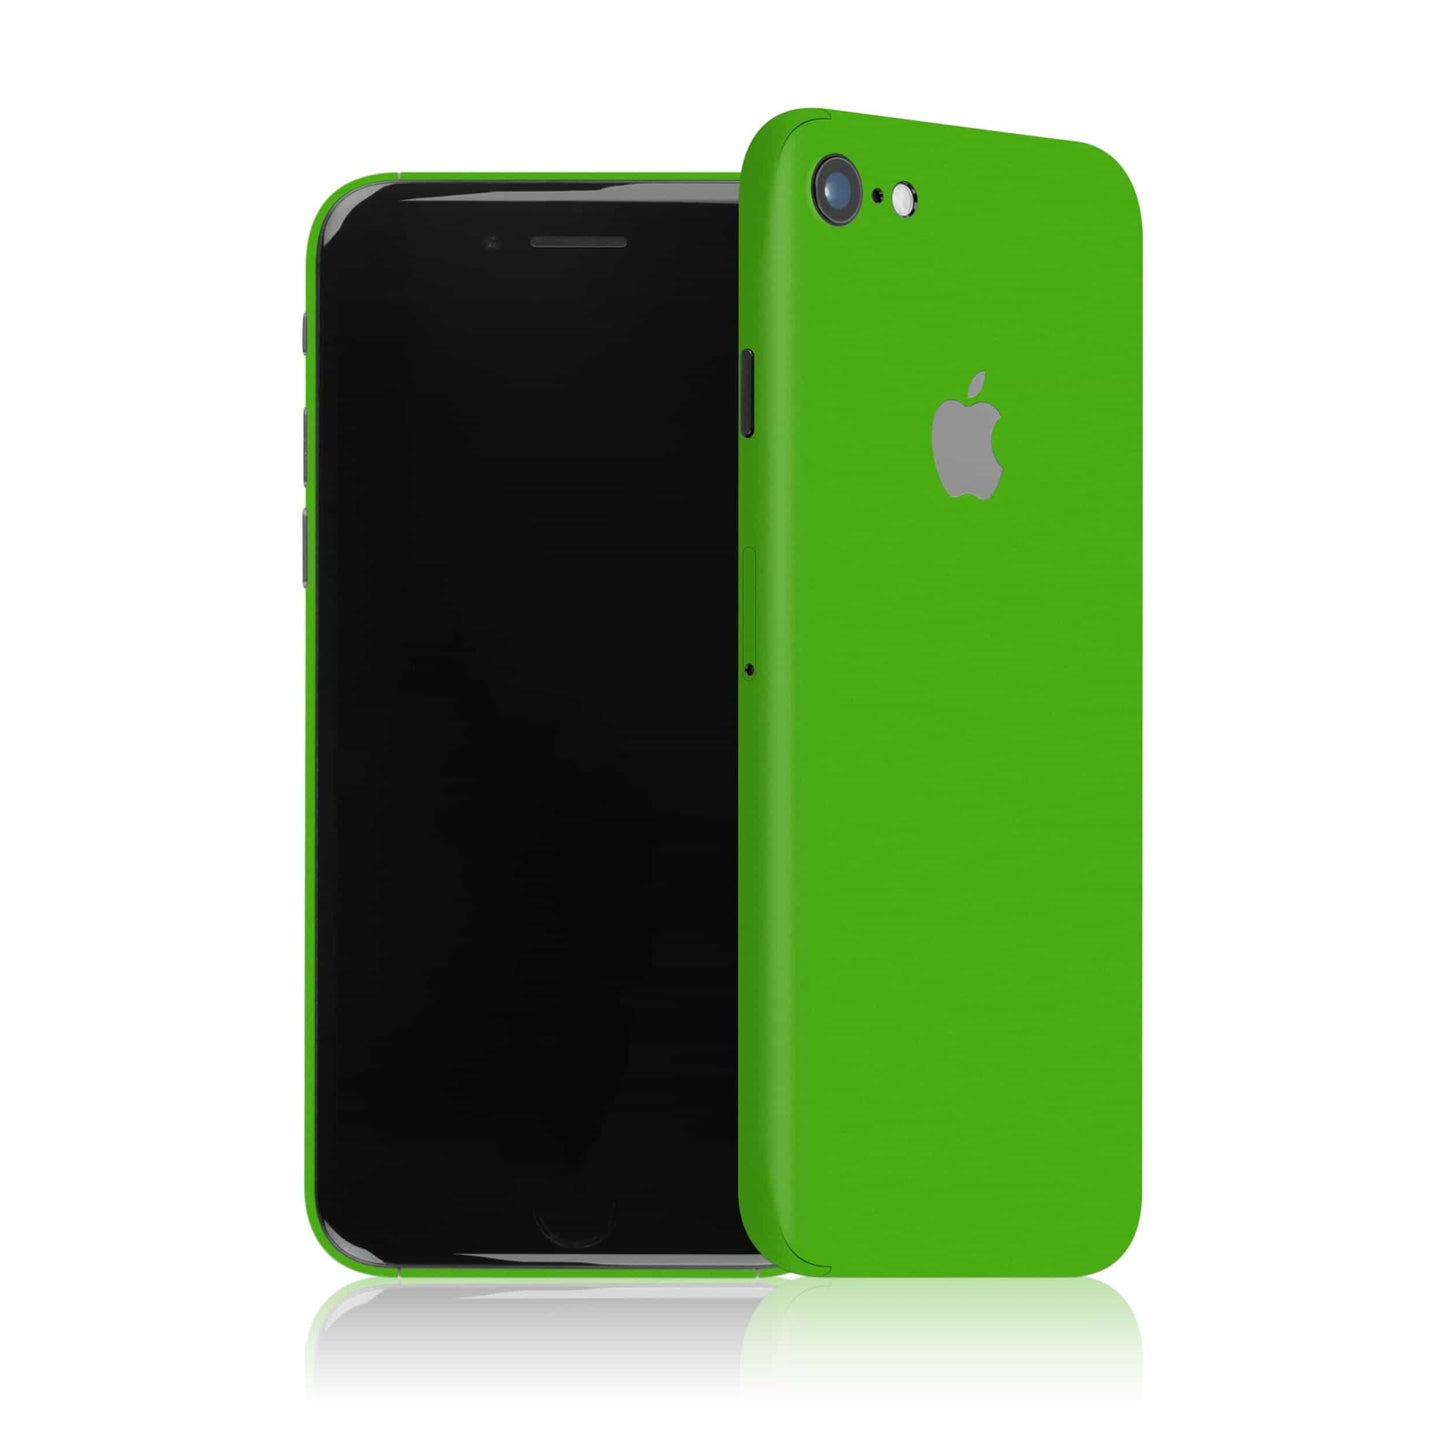 iPhone 7 - Color Edition